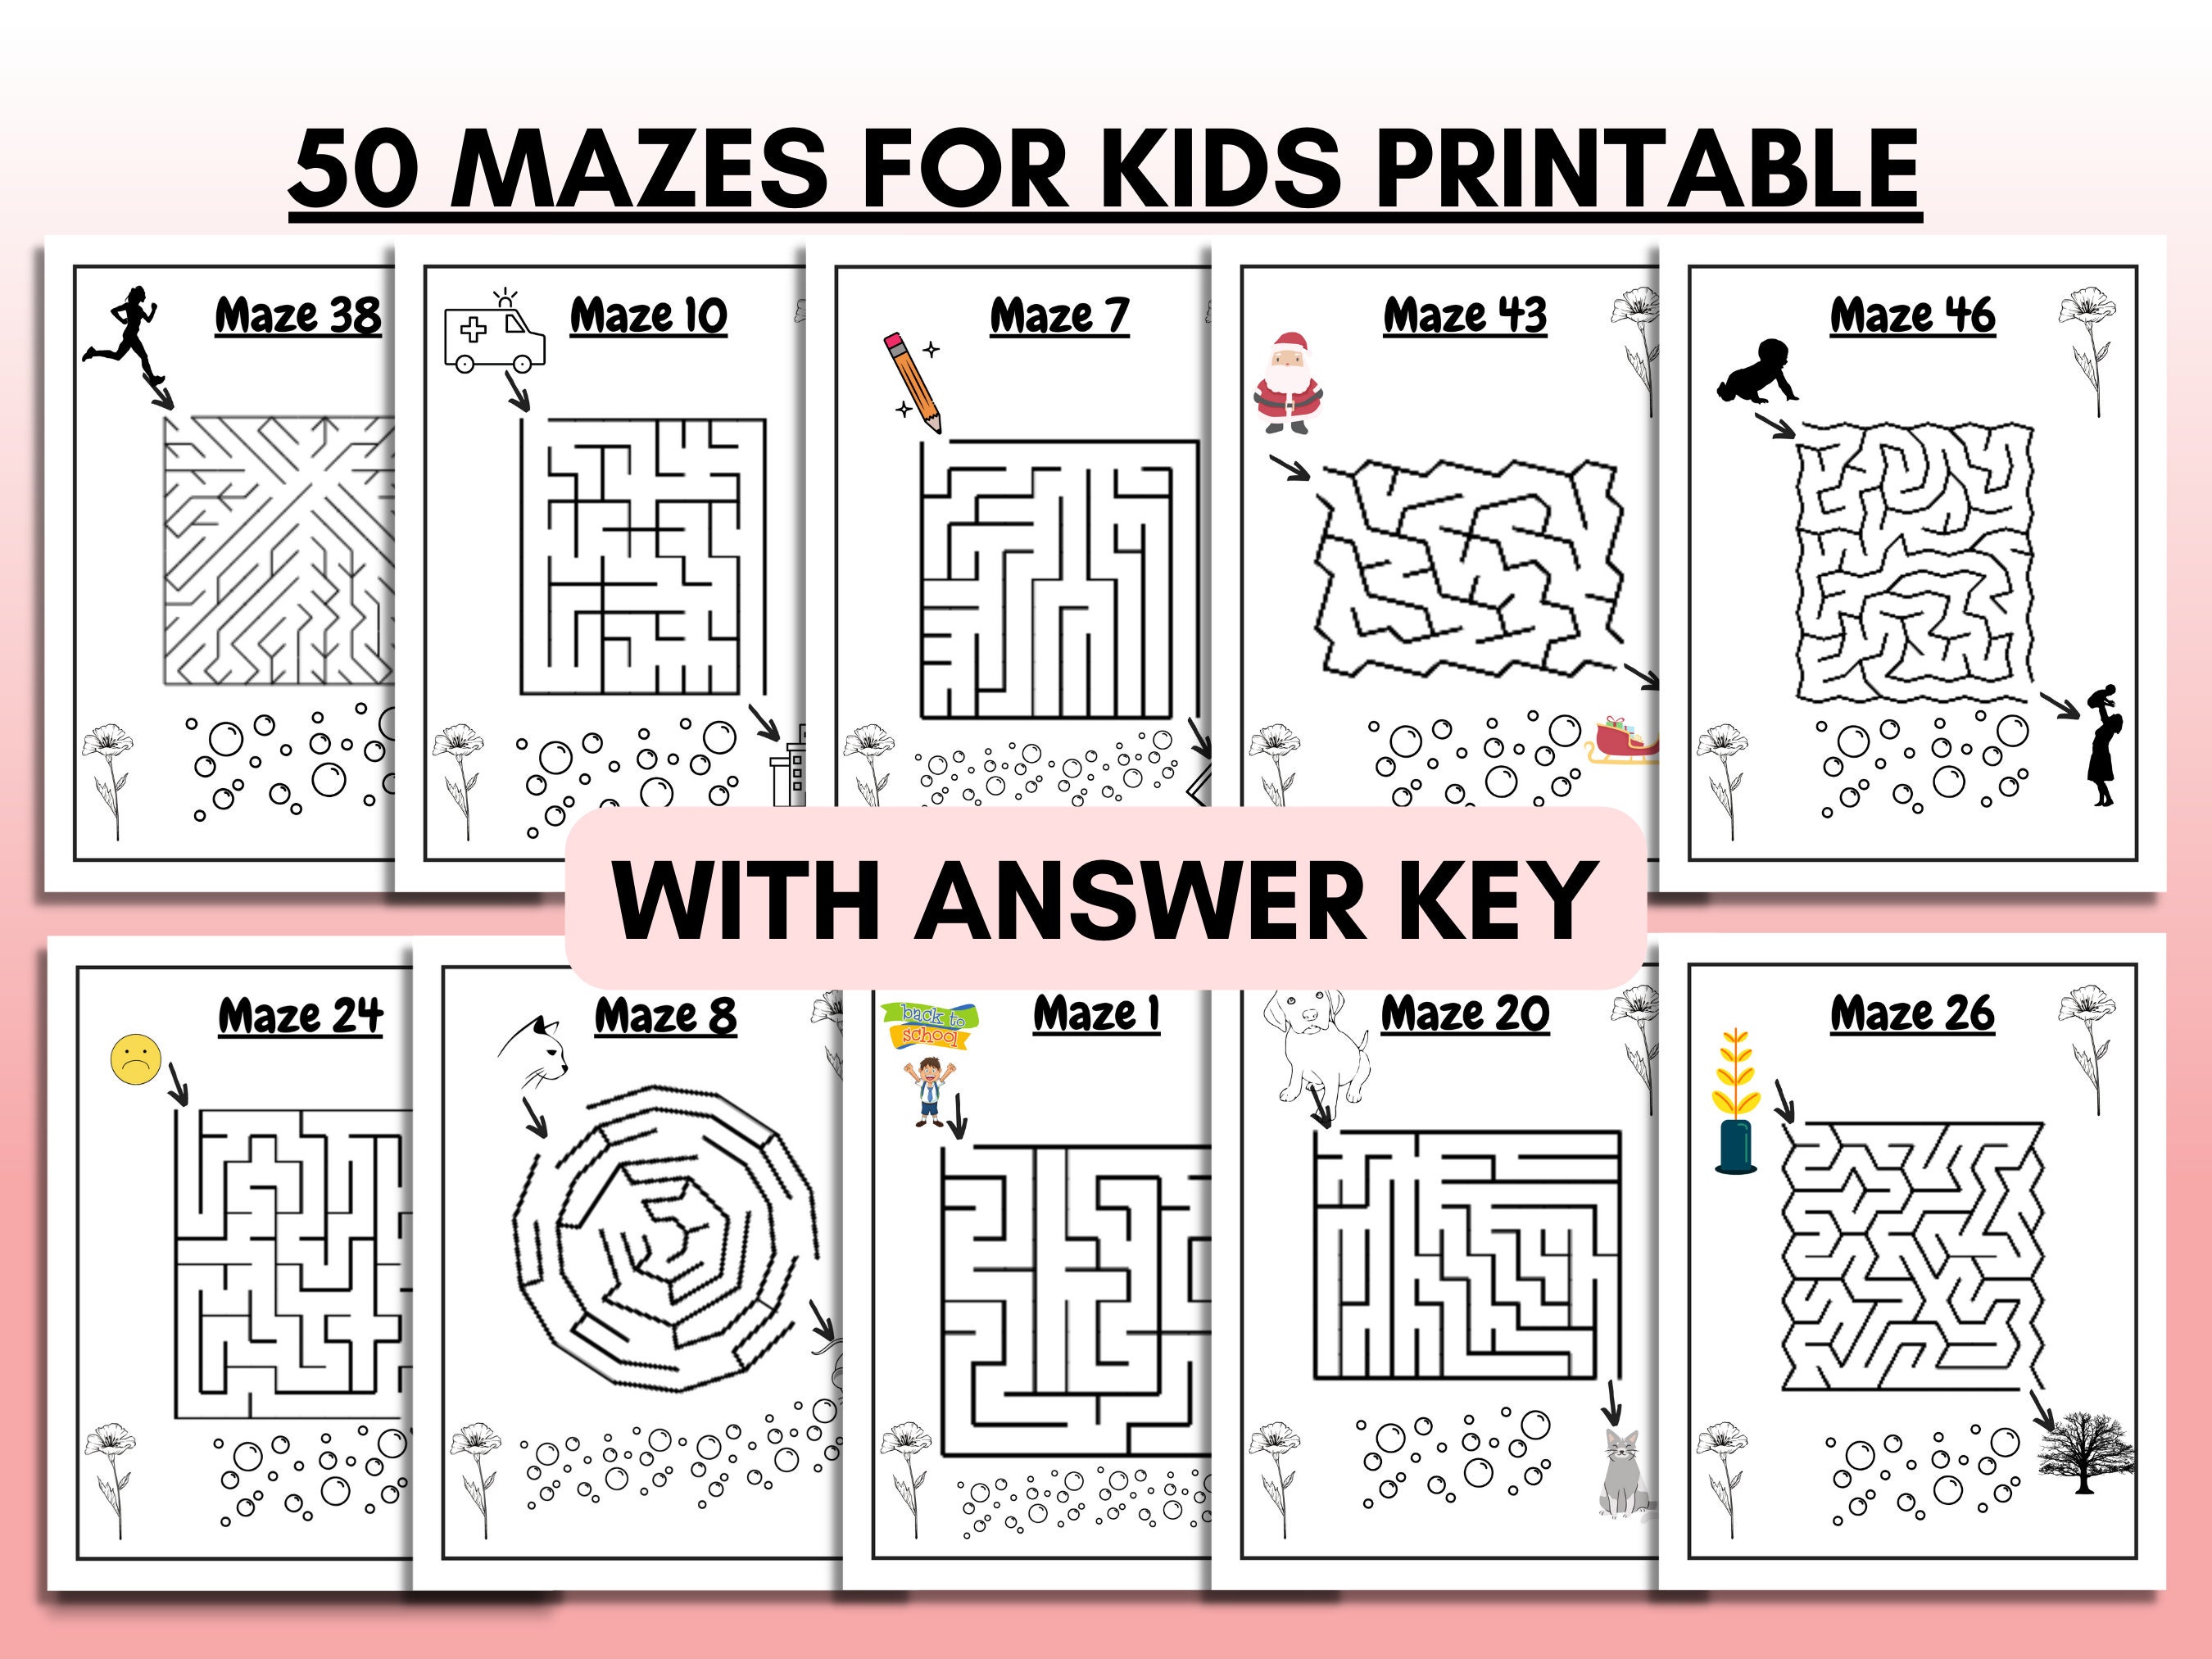 Mazes for Kids Age 4-8: Brain quest mazes for preschoolers Visual